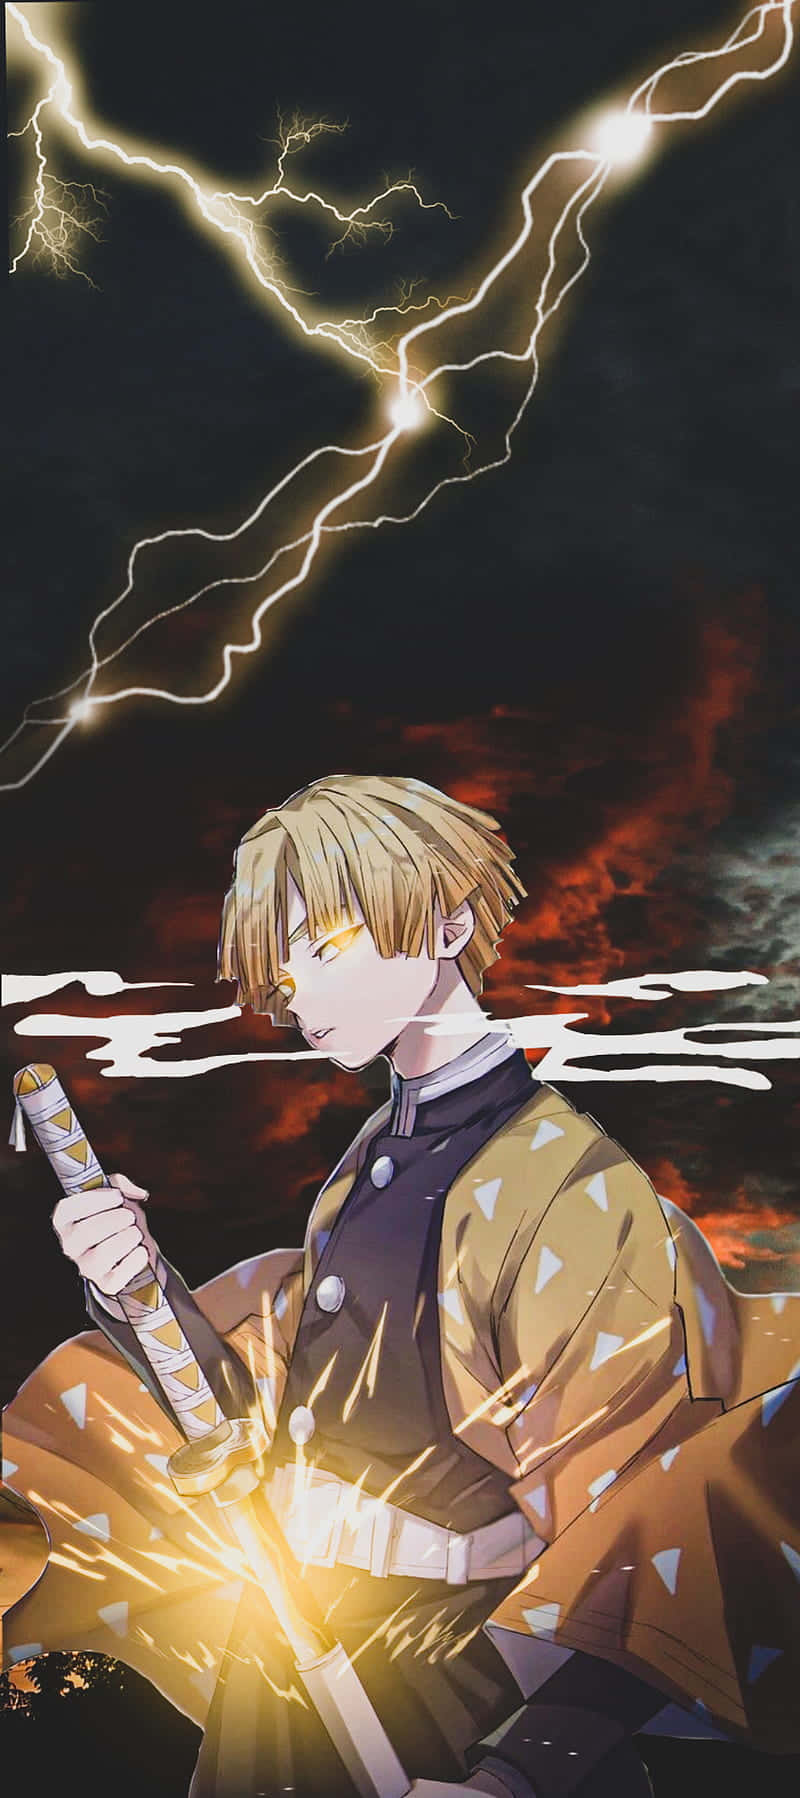 A Character With Lightning In His Hands Wallpaper